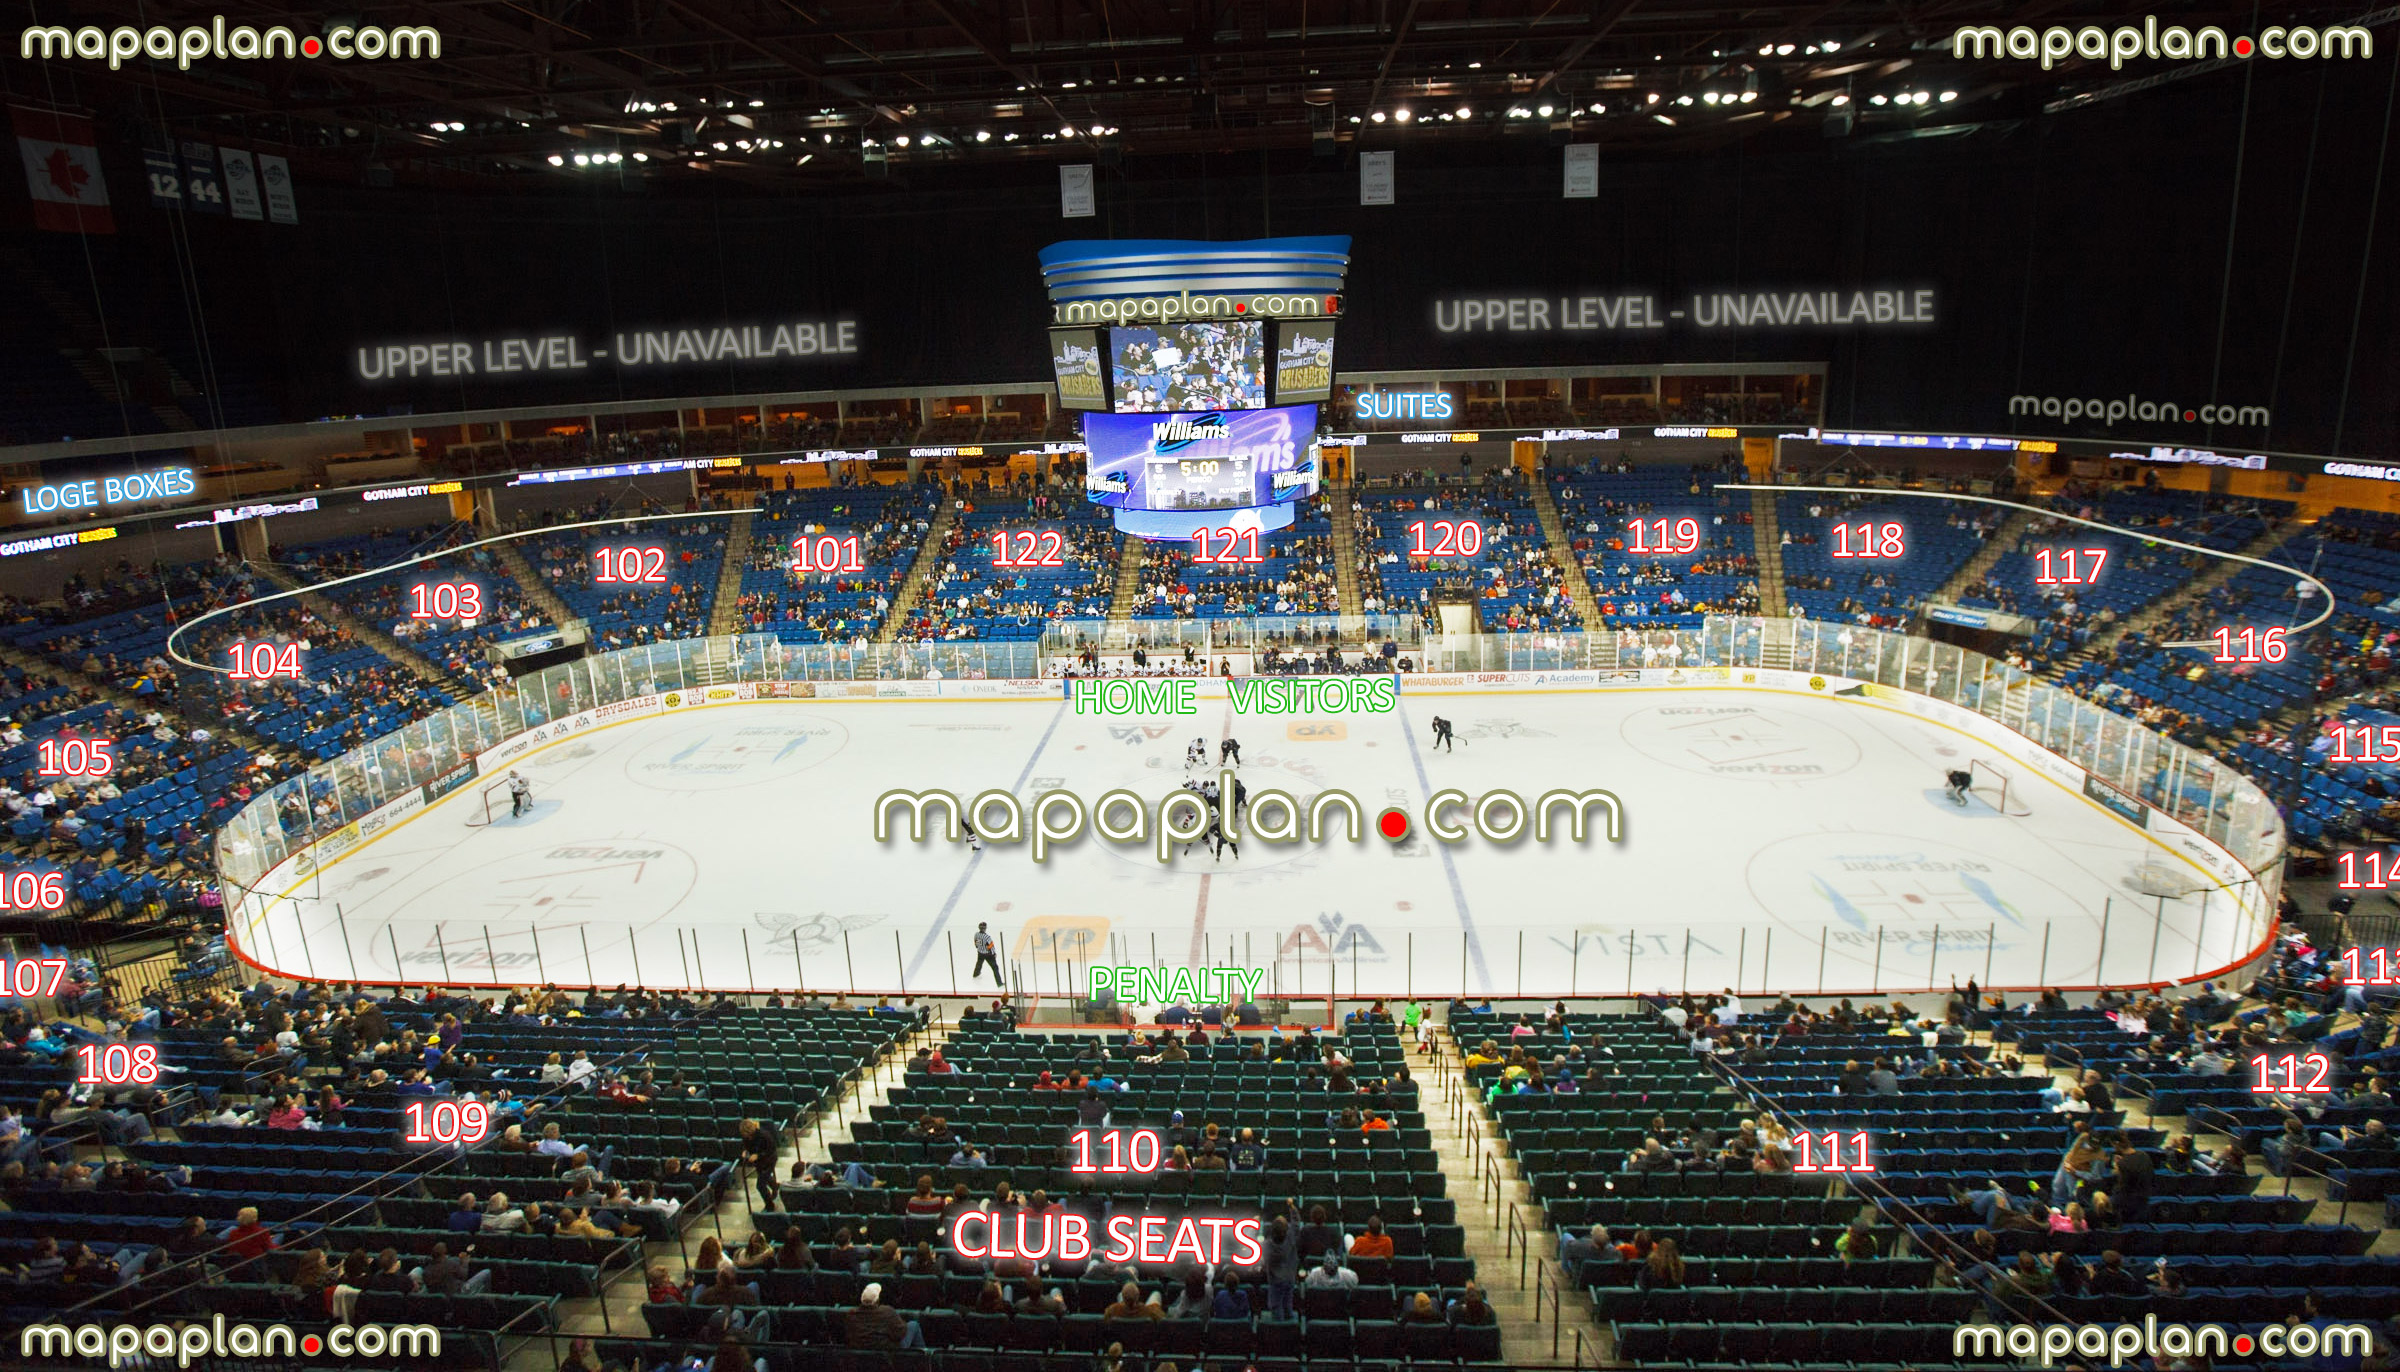 view section 110 row w seat 3 oilers ice hockey rink interactive picture lower level seats home team visitors bench boxes luxury suites Tulsa BOK Center seating chart